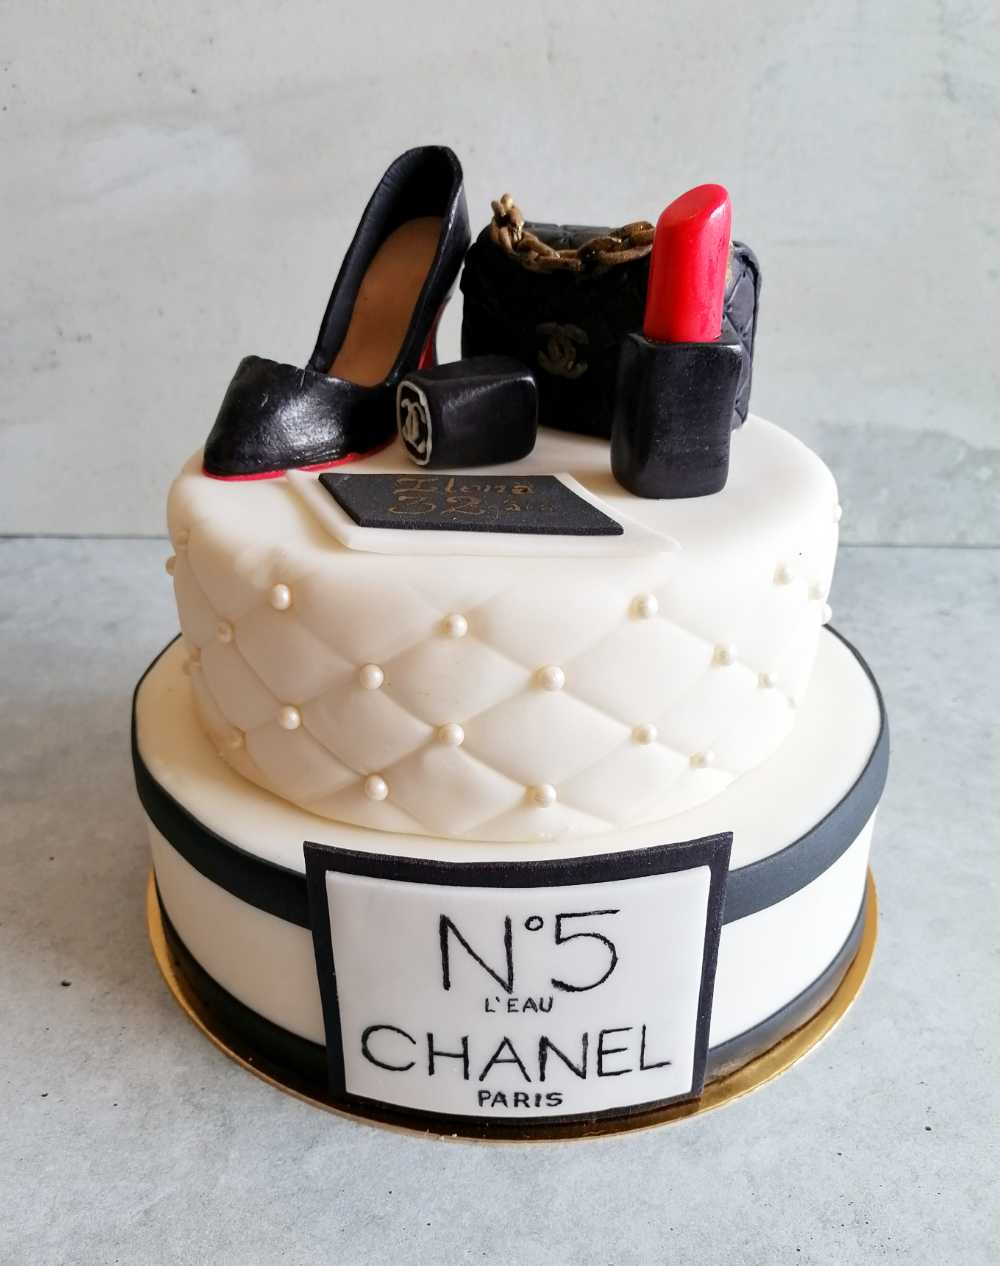 Elegant cake Chanel 5 - Custom Cakes for Special Order by Sweet Wentzl Cafe & Confectionery, Cakes and Pastries, Krakow